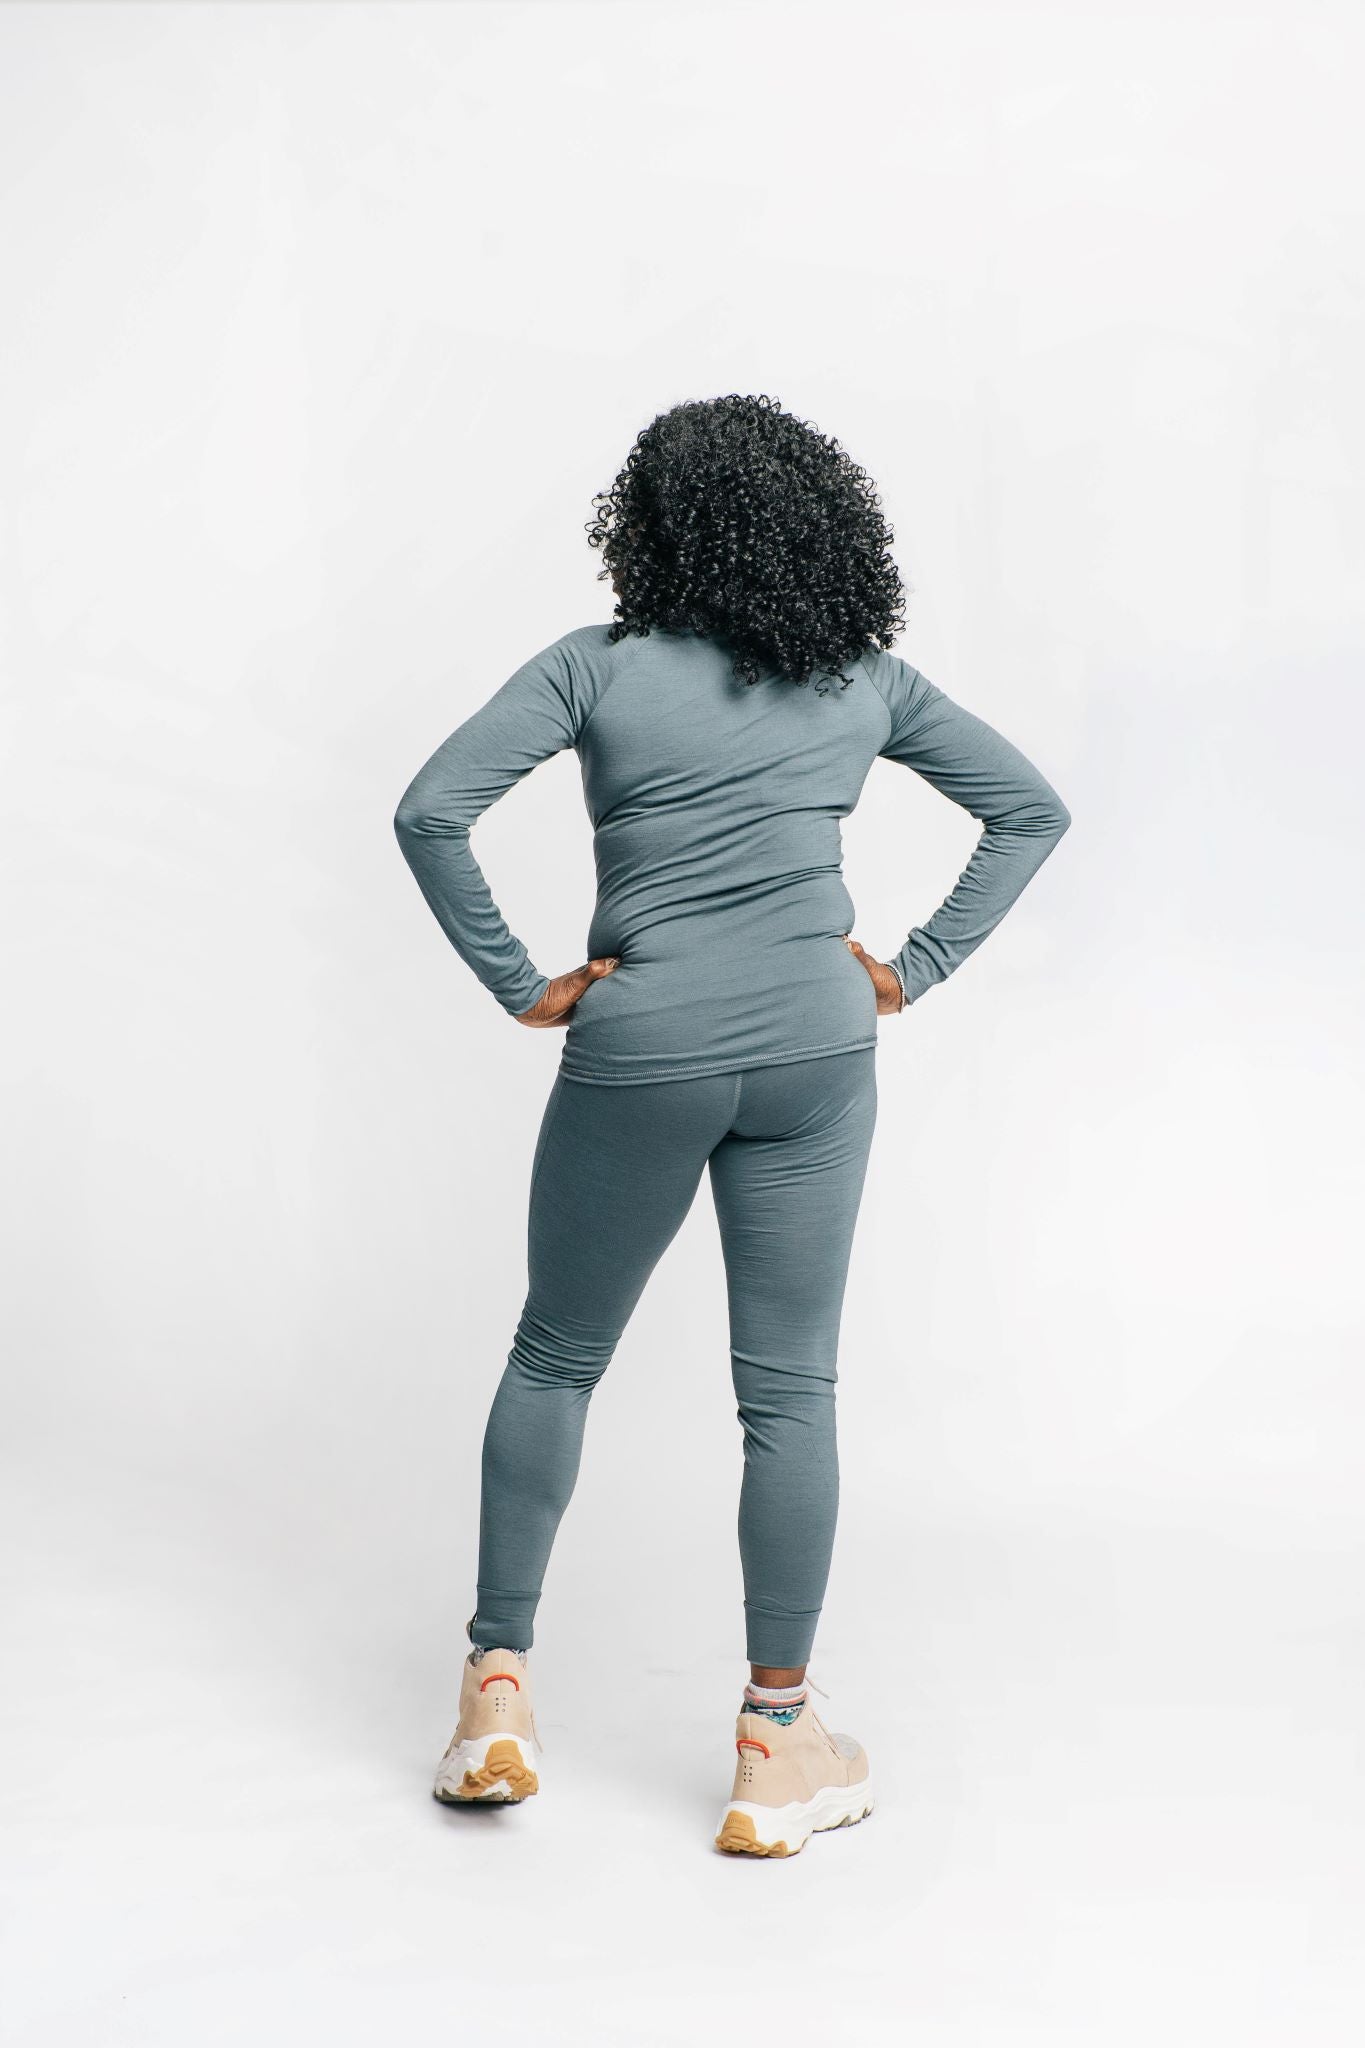 alpine fit merino wool base layer top and bottom on model back view